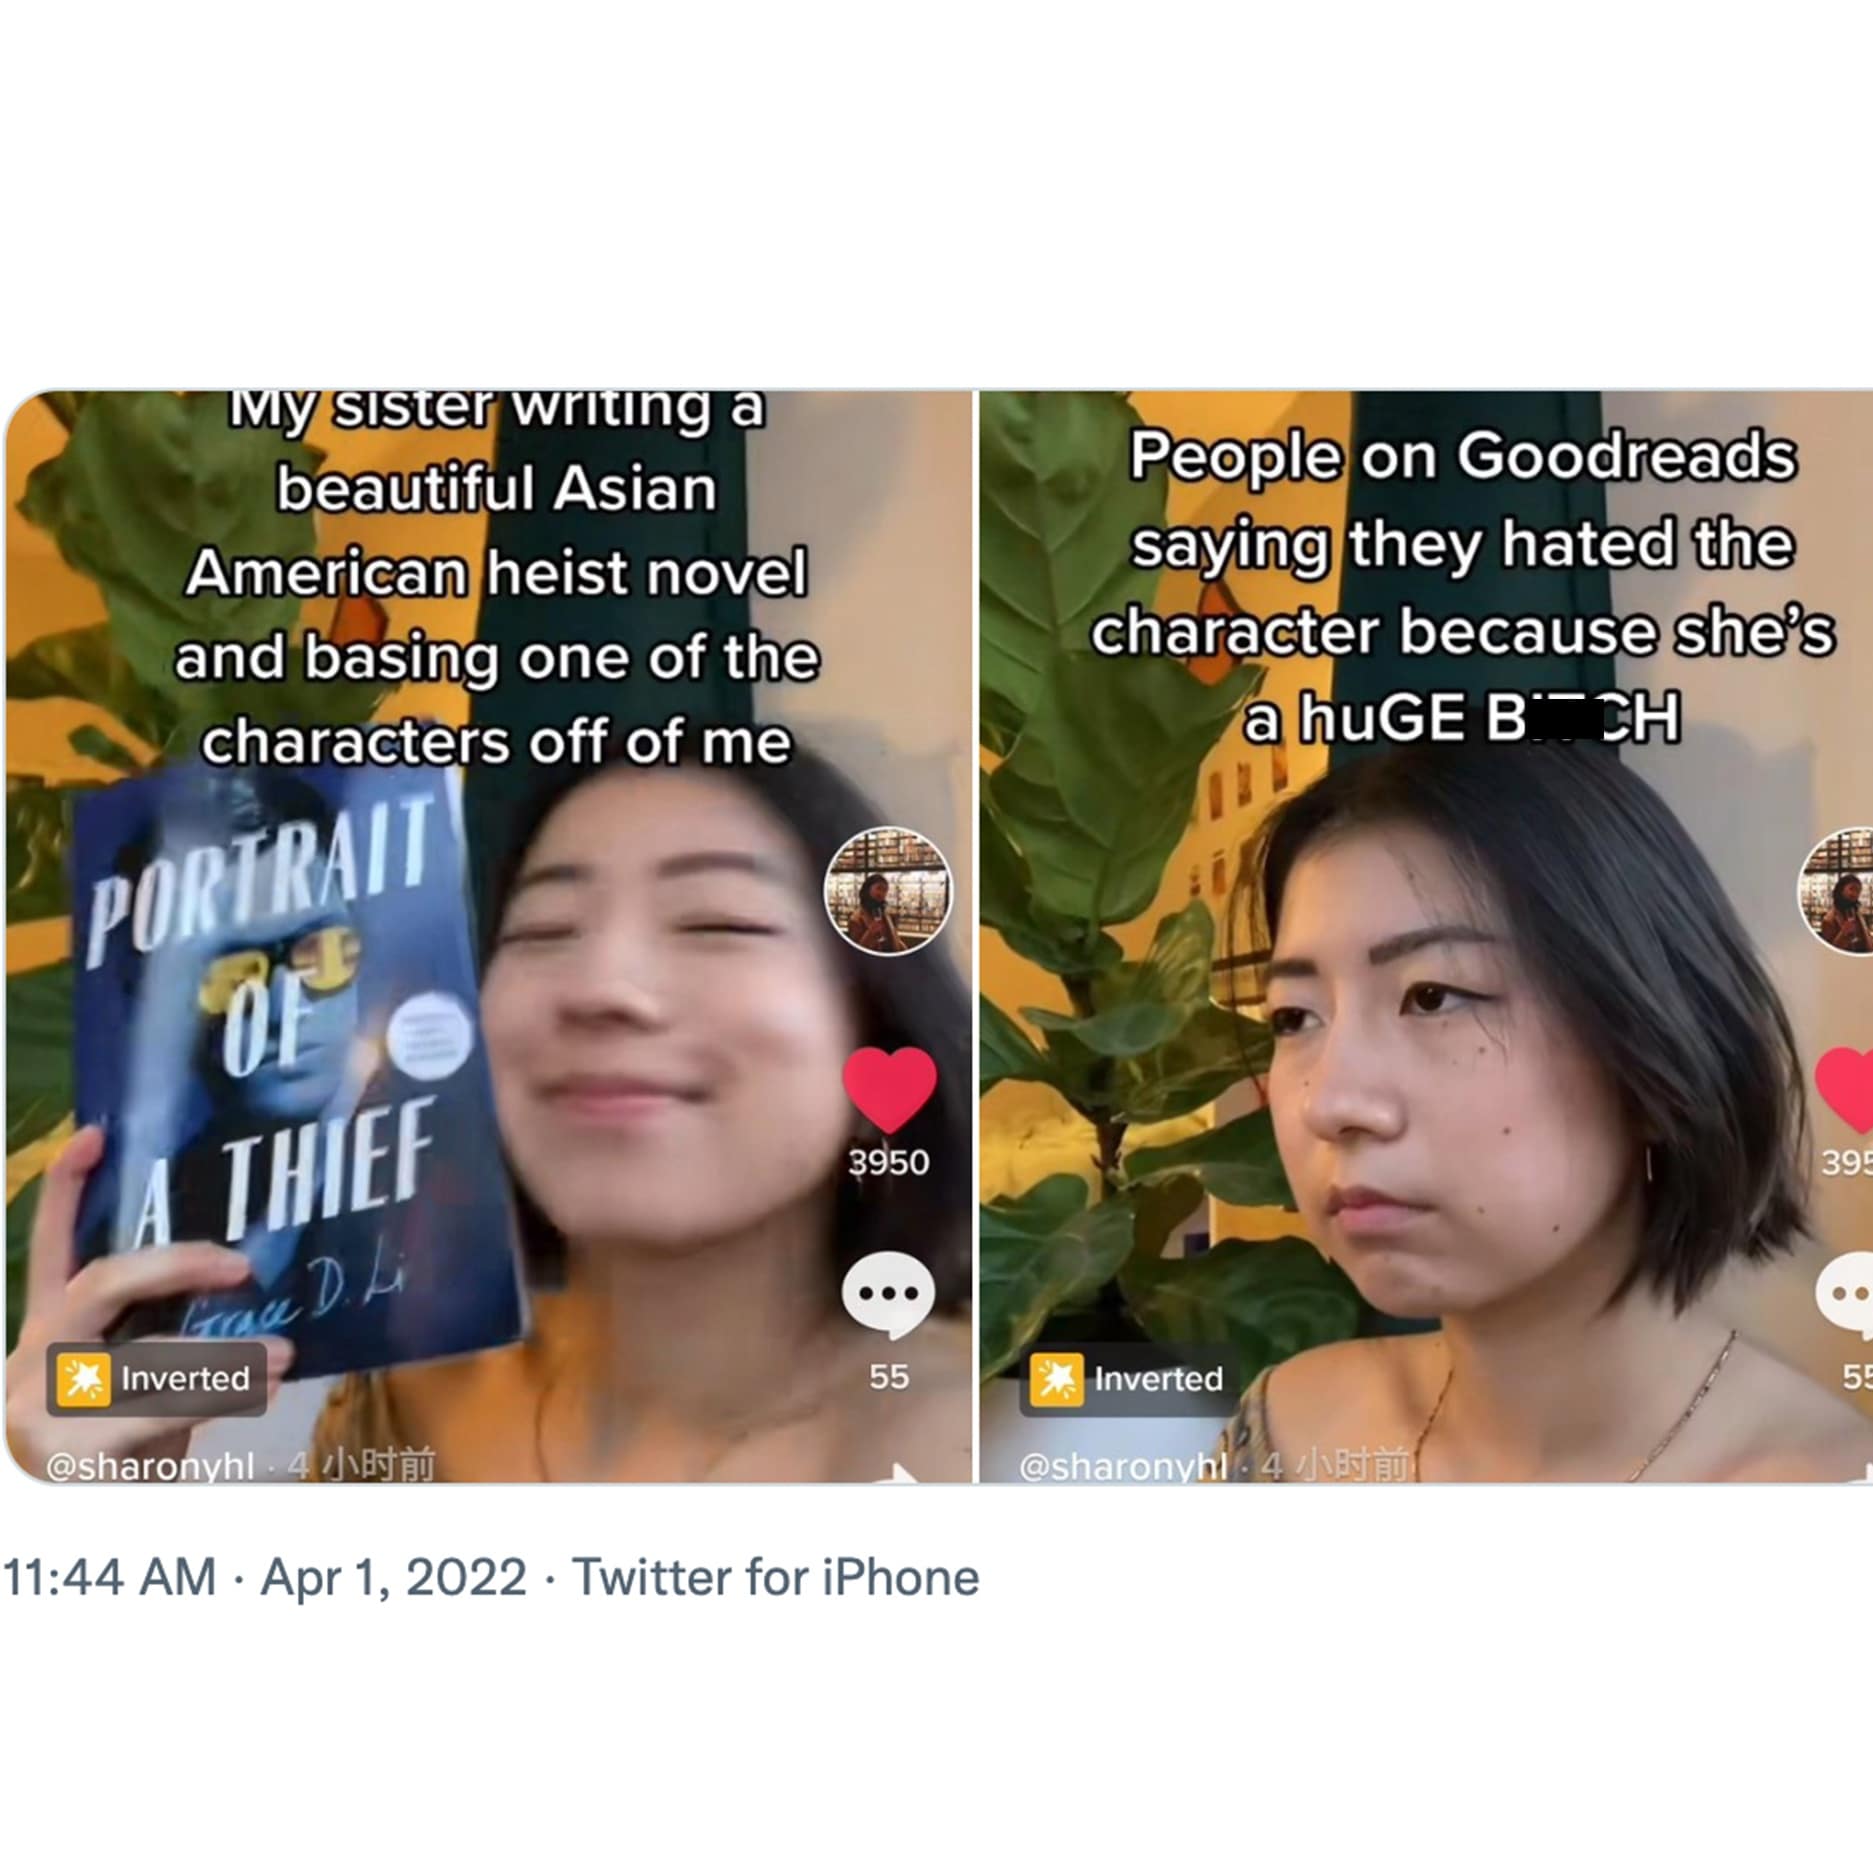 Women Posting Their L's - hair coloring - My sister writing a beautiful Asian American heist novel and basing one of the characters off of me People on Goodreads saying they hated the character because she's a huGE BCh Portrait Of 3950 395 A Thief Grace D